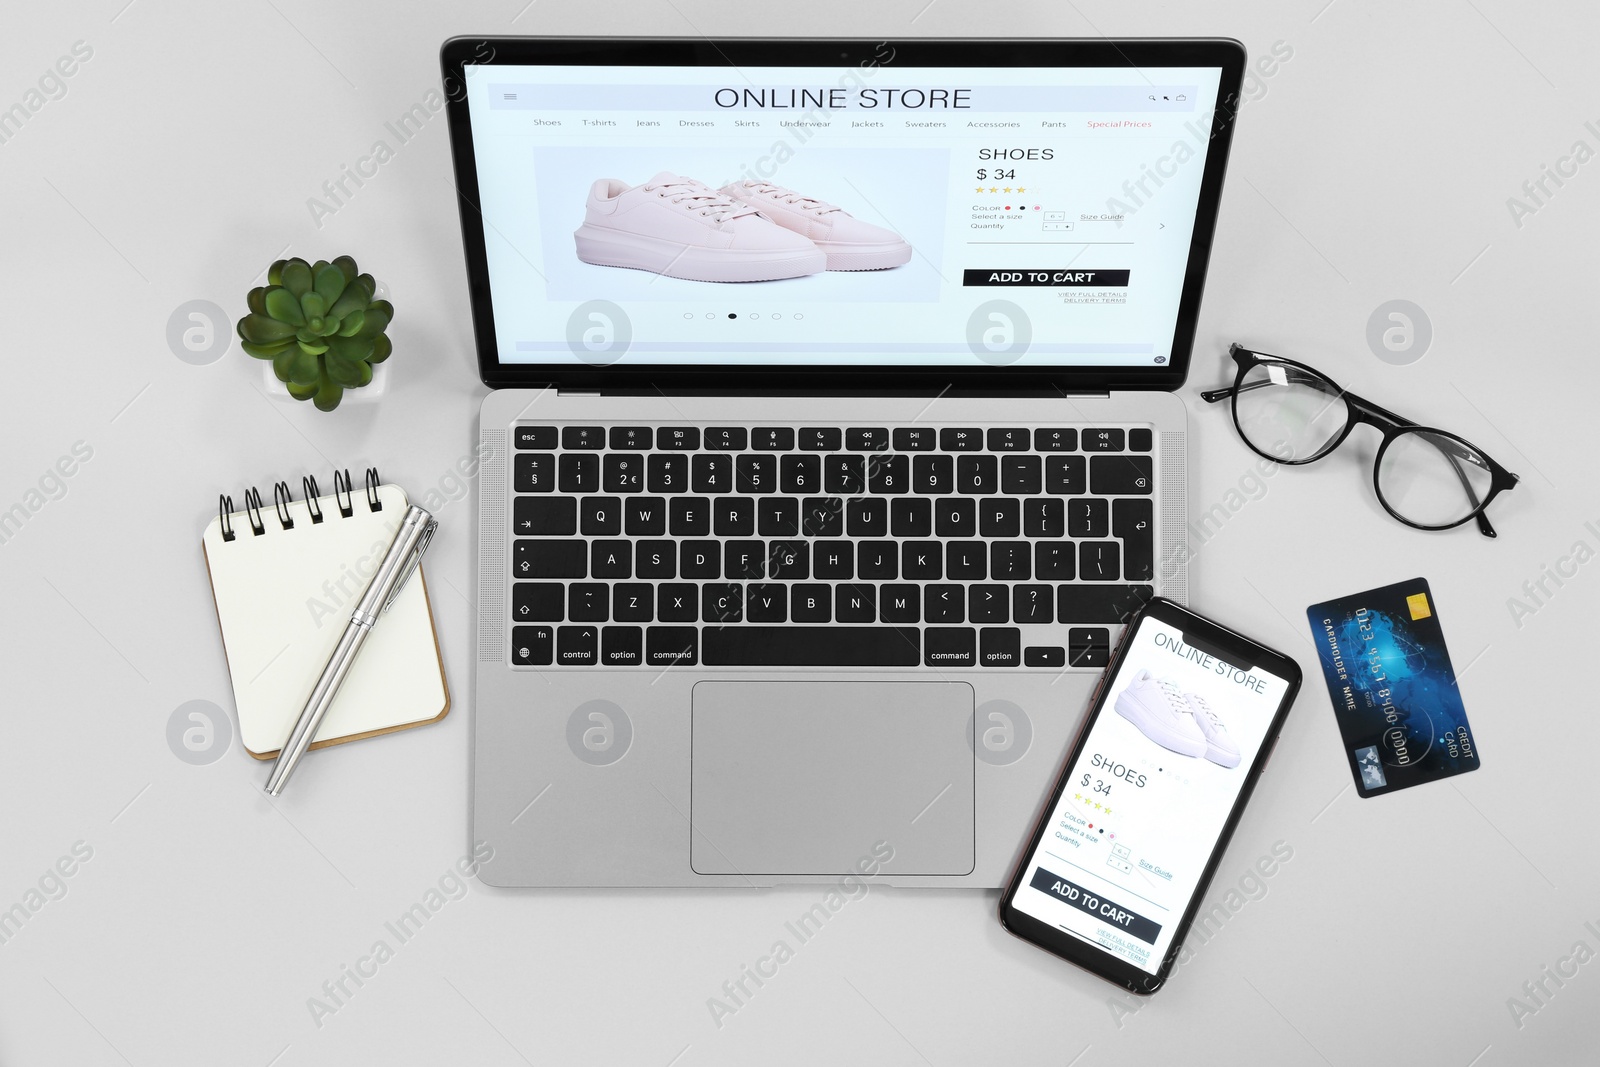 Photo of Online store website on laptop screen. Computer, smartphone, stationery, glasses, credit card and houseplant on grey background, flat lay